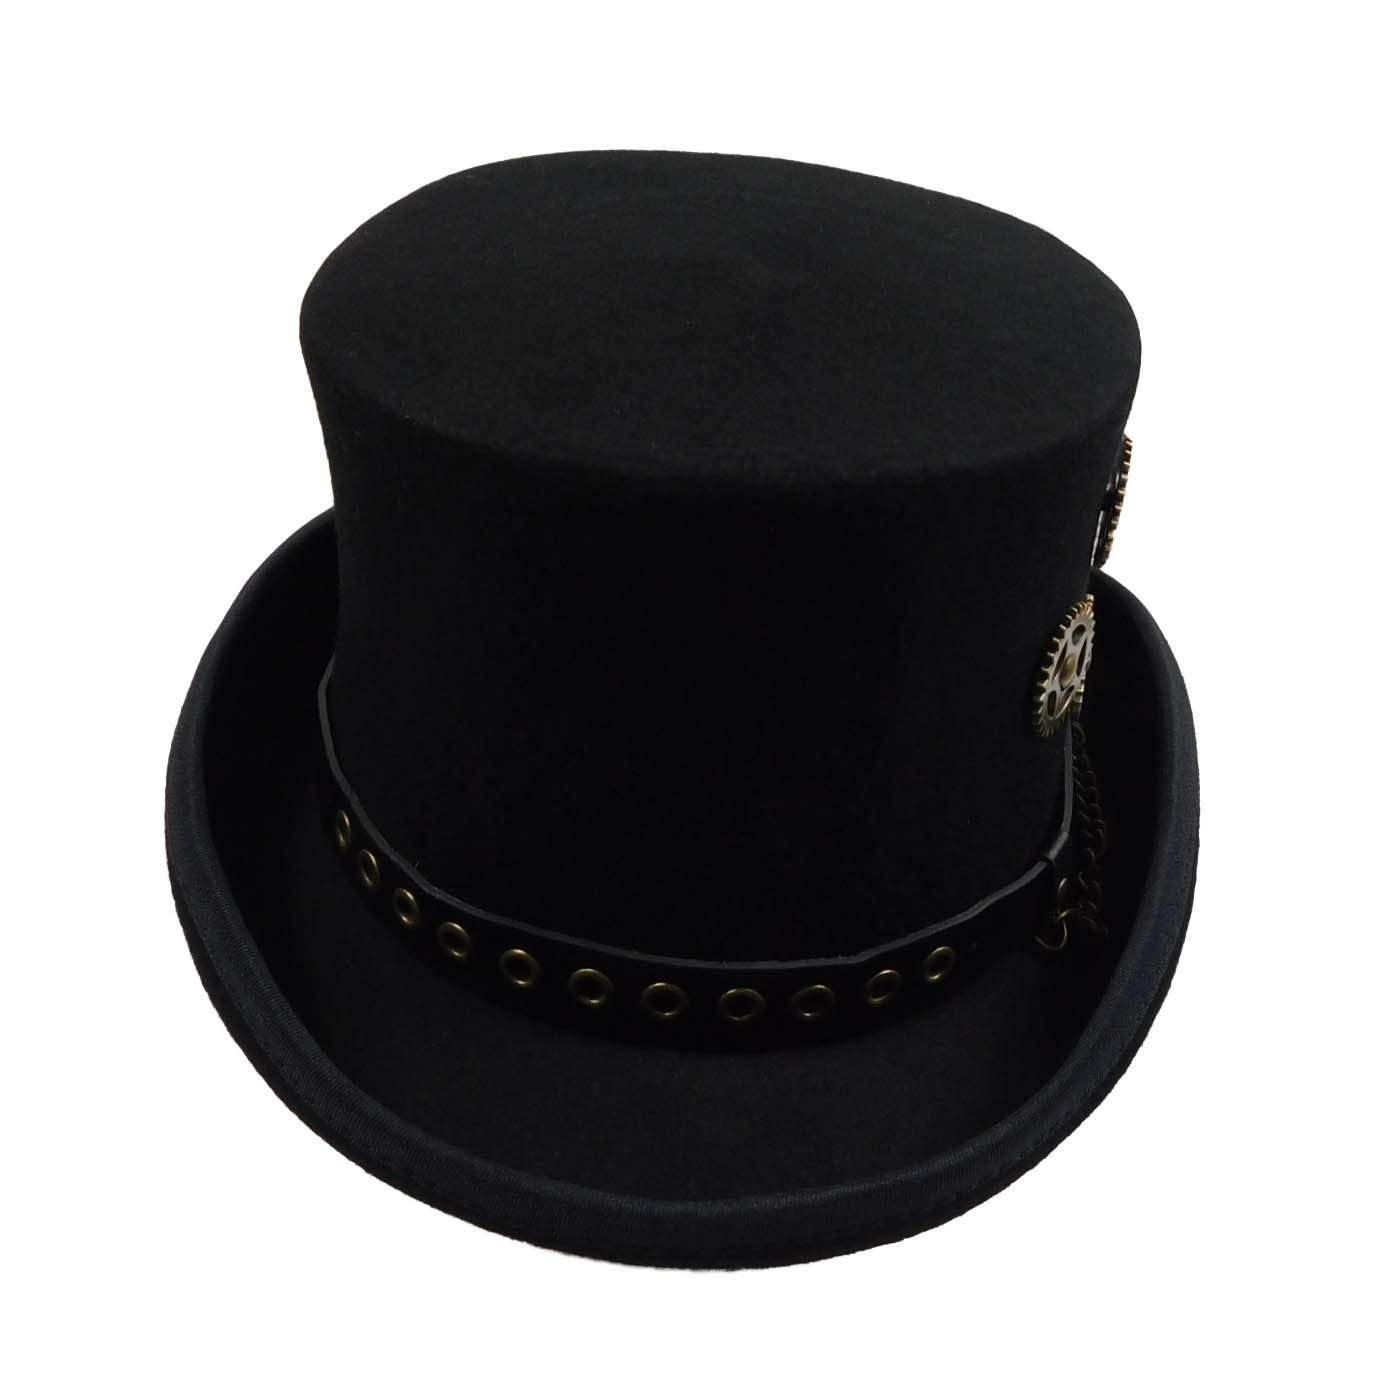 Steampunk Top Hat - K. Keith Top Hat Great hats by Karen Keith    